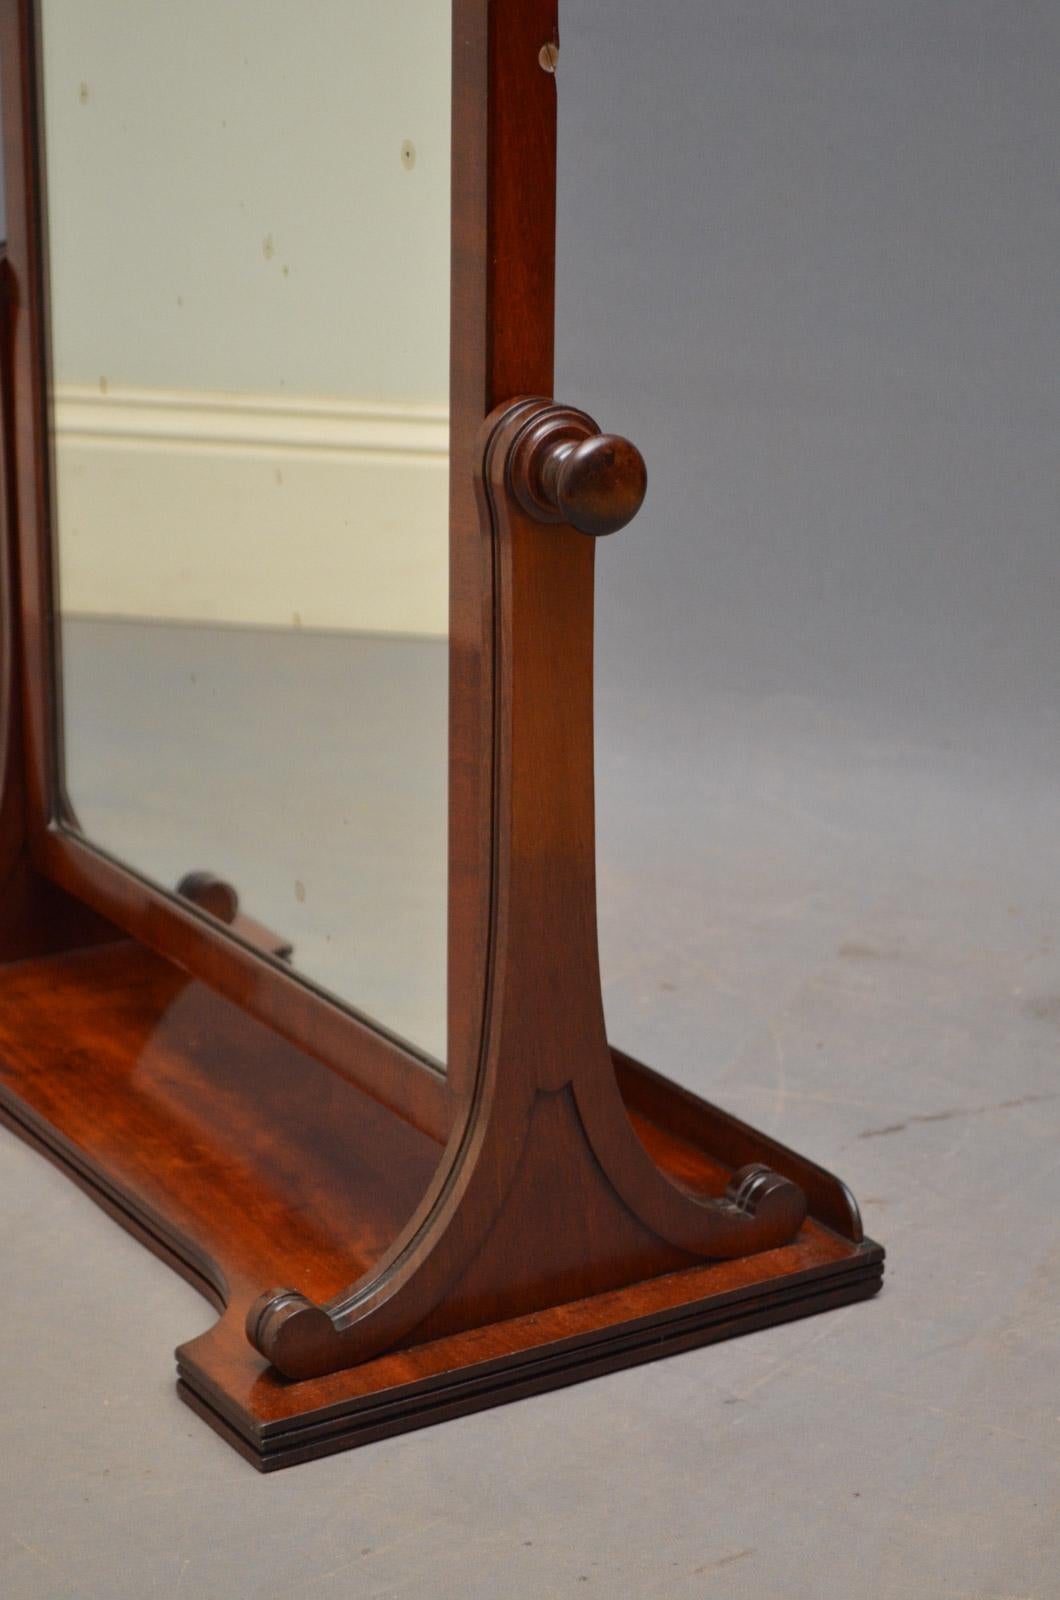 English Regency Toilet Mirror by Gillows